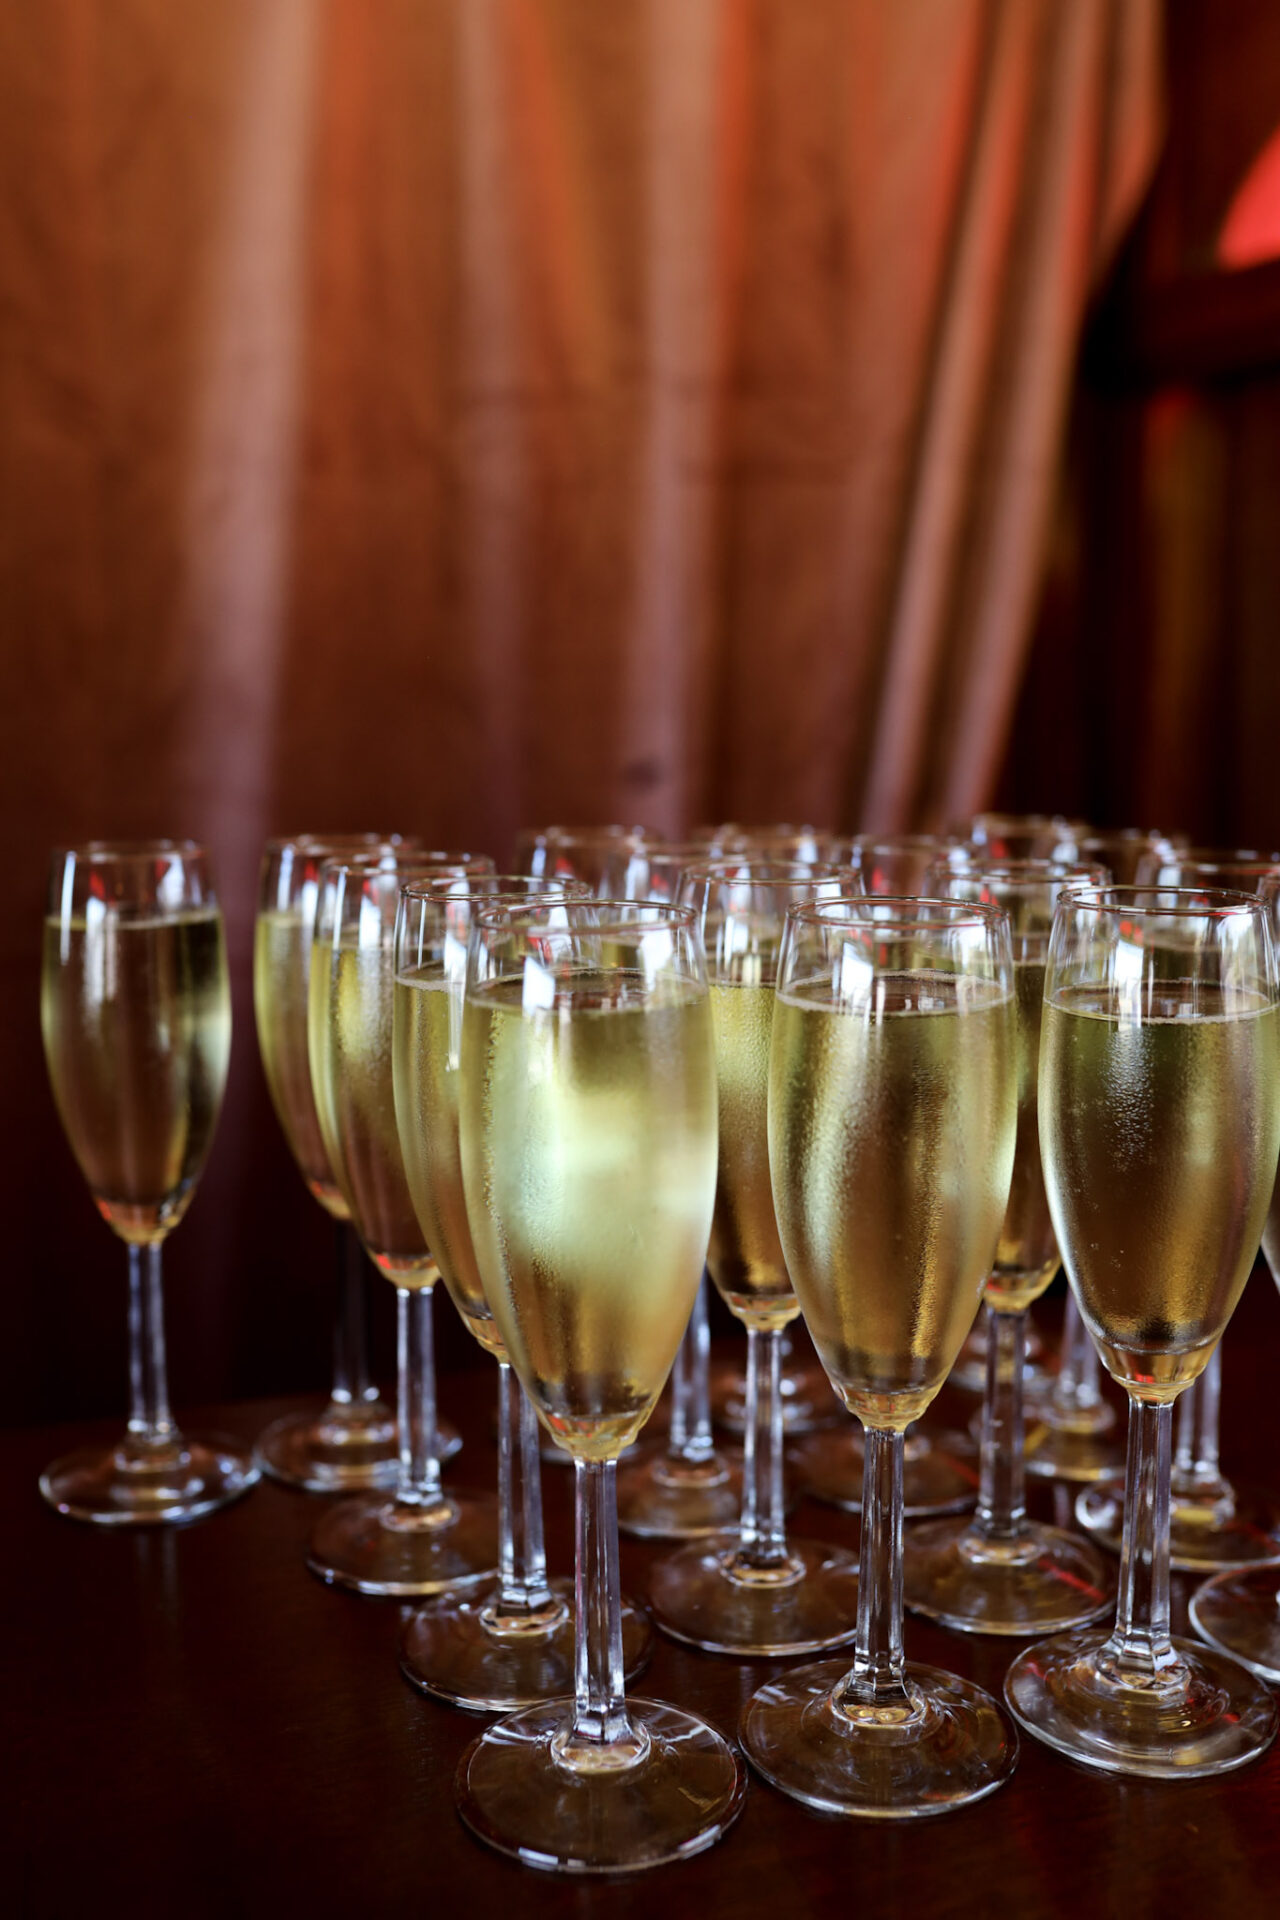 Many glasses of open champagne flutes on a table